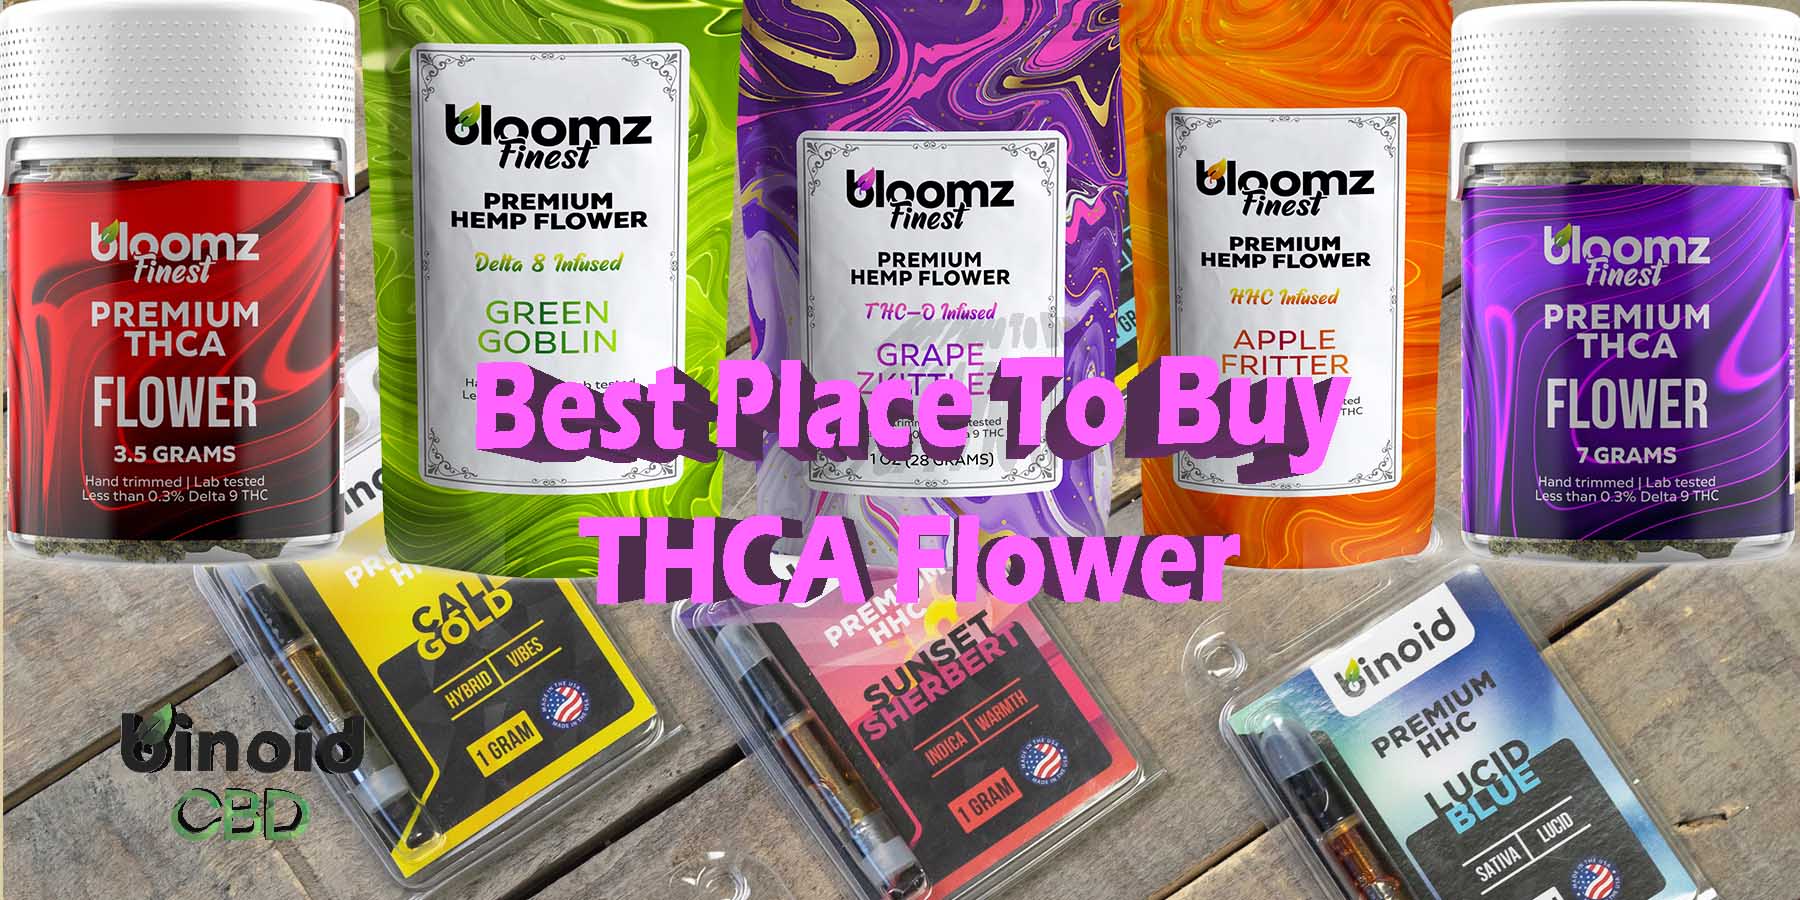 Best Place To Buy THCA Flower Where To Get Near Me Best Place Lowest Price Coupon Discount Strongest Brand Bloomz